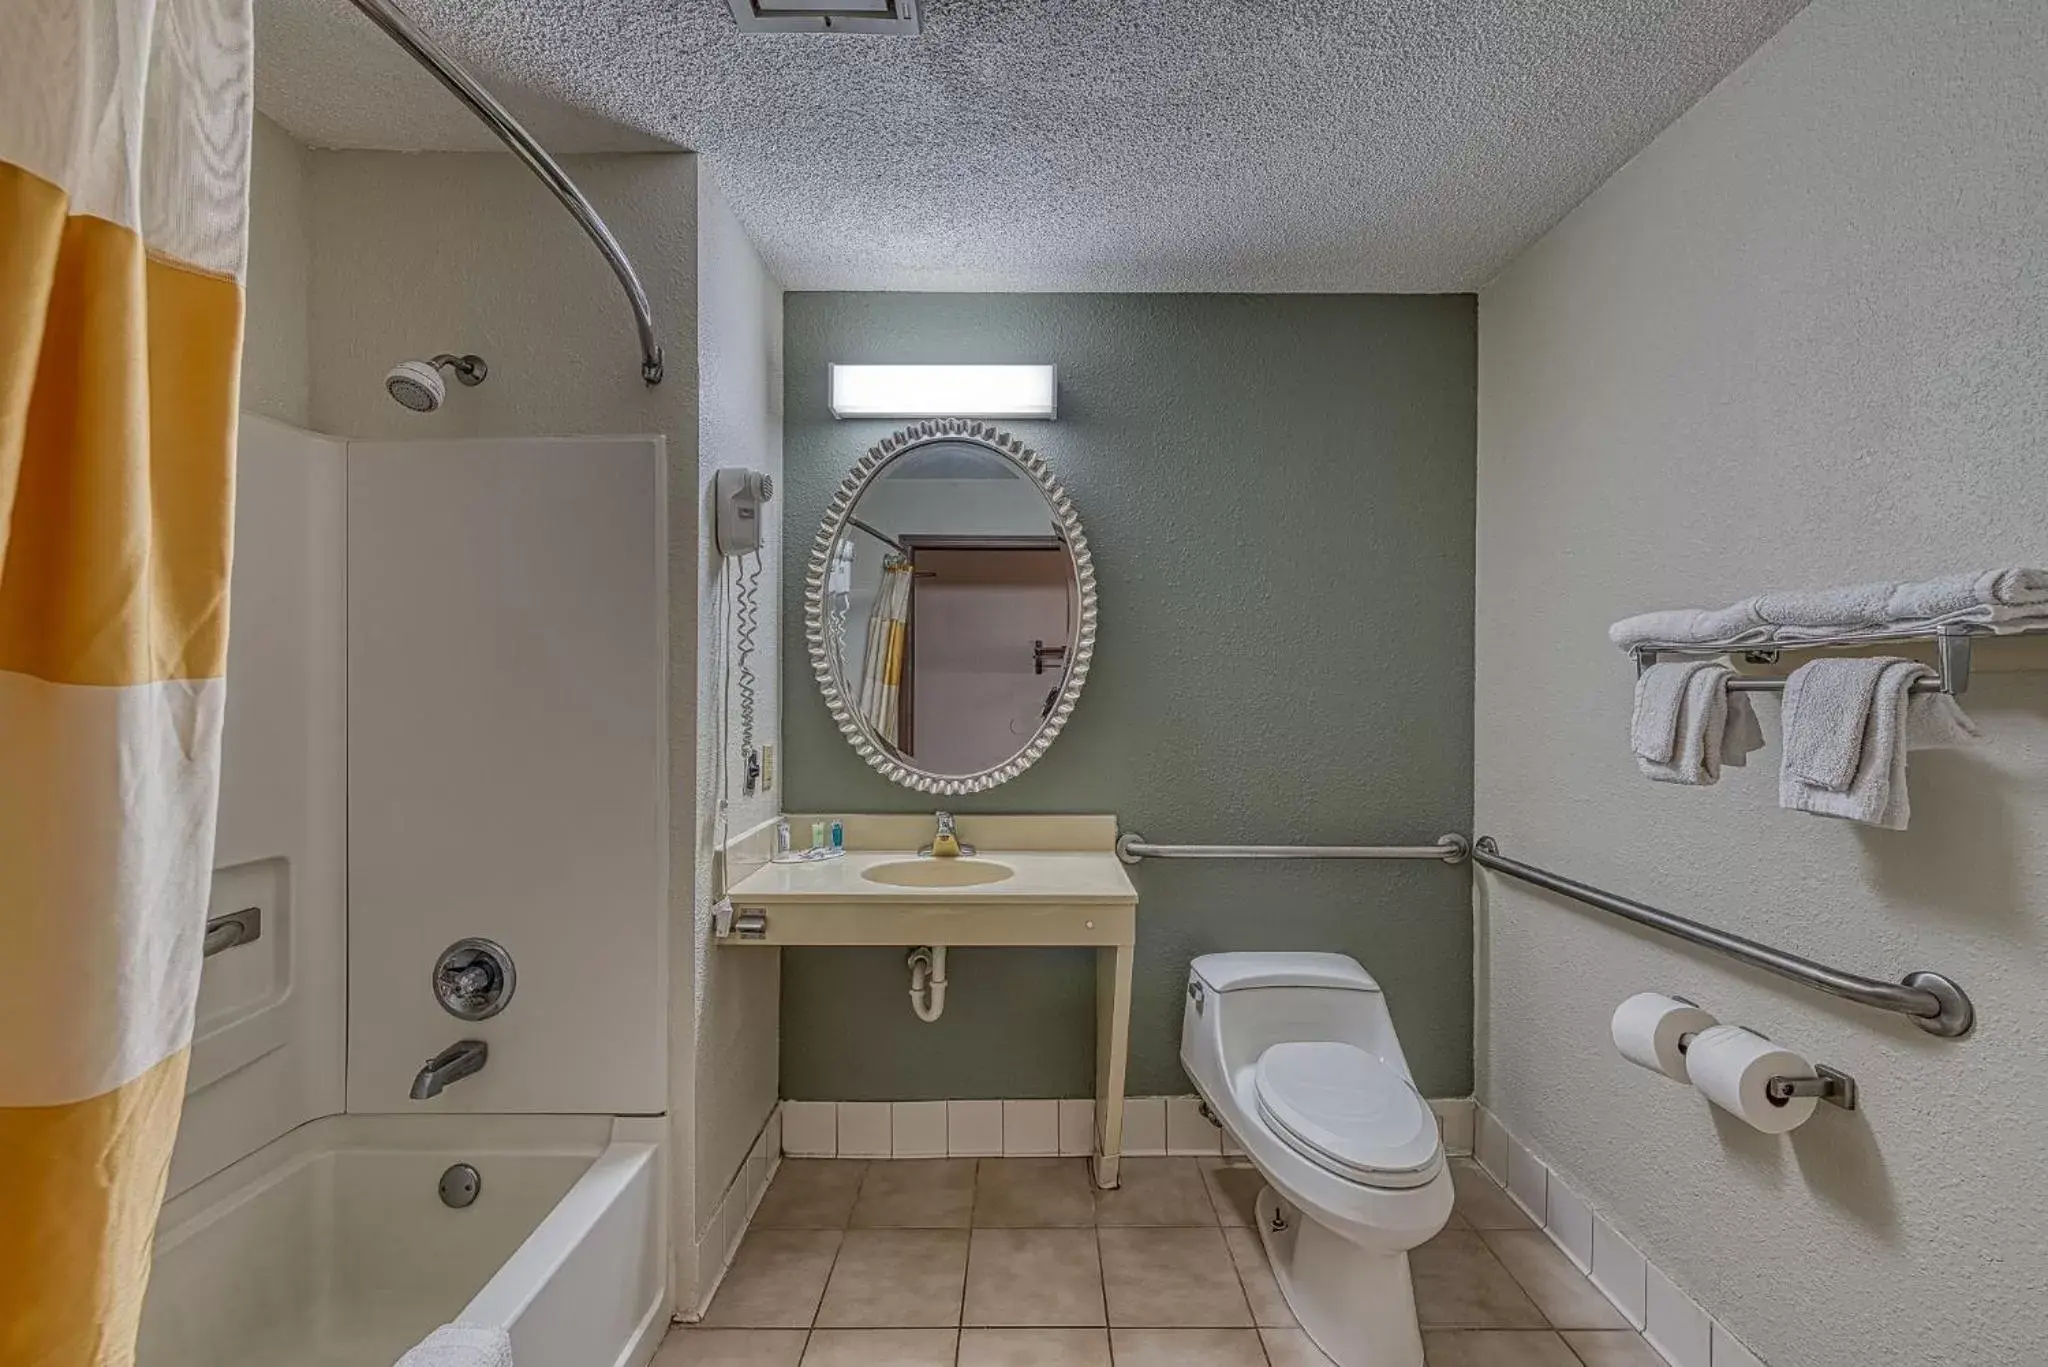 Facility for disabled guests, Bathroom in American Inn & suites